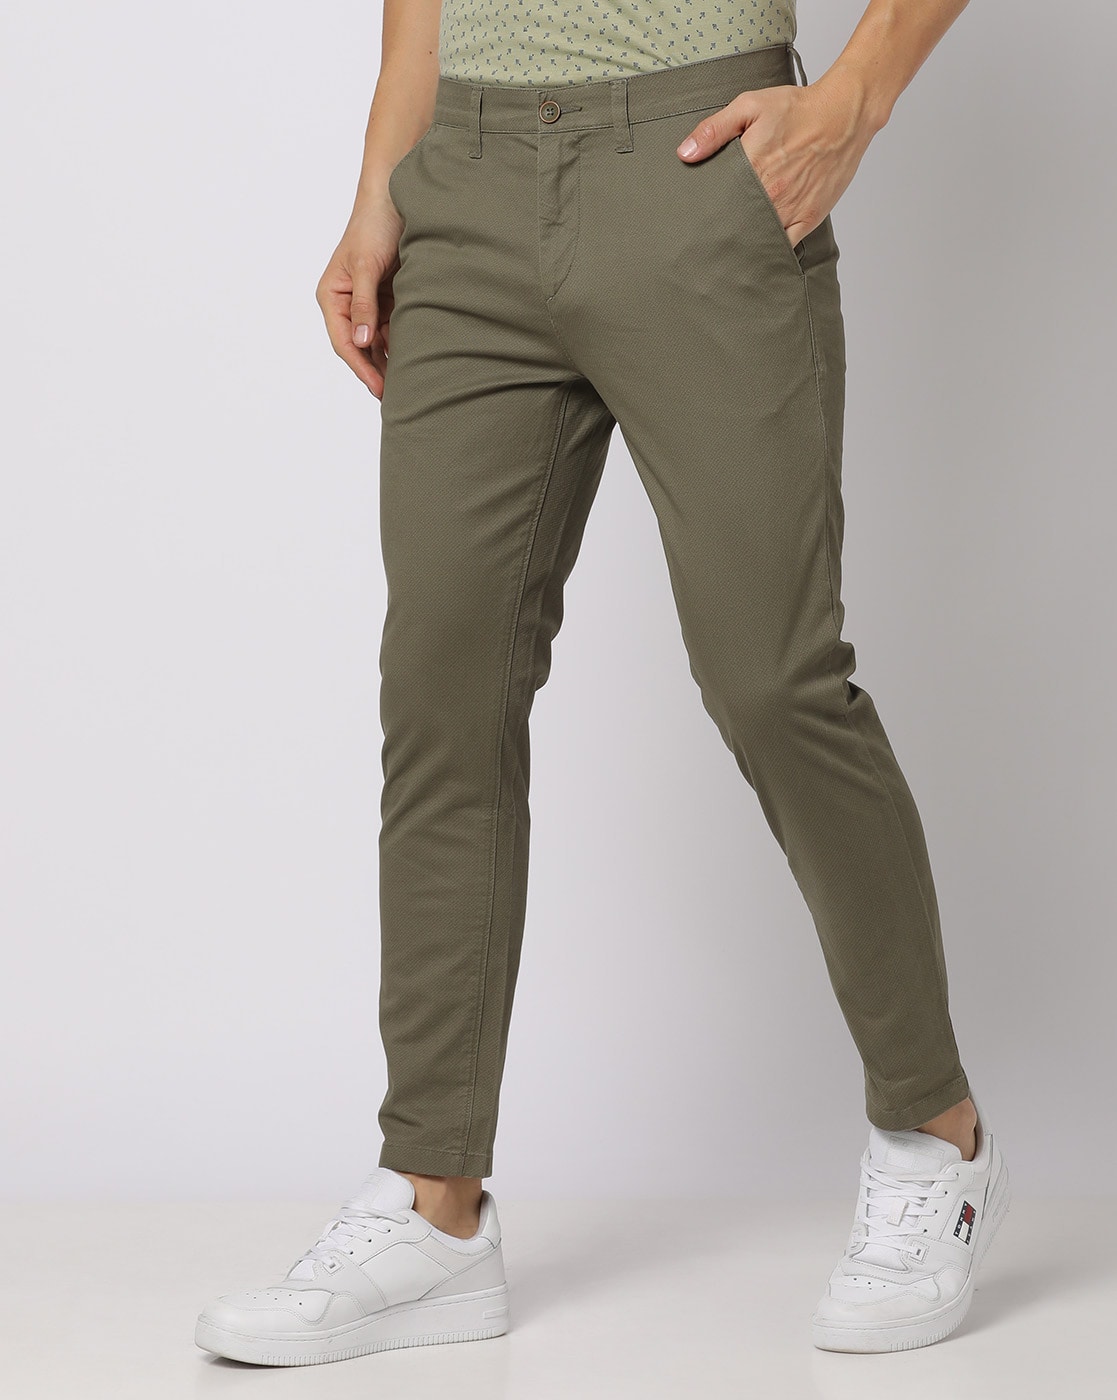 Mens Striped Denim Cargo Pants With Big Pockets Hip Hop Style, Loose Fit,  Brand Mens Skinny Cargo Trousers D25315J From Ugrif, $32.09 | DHgate.Com